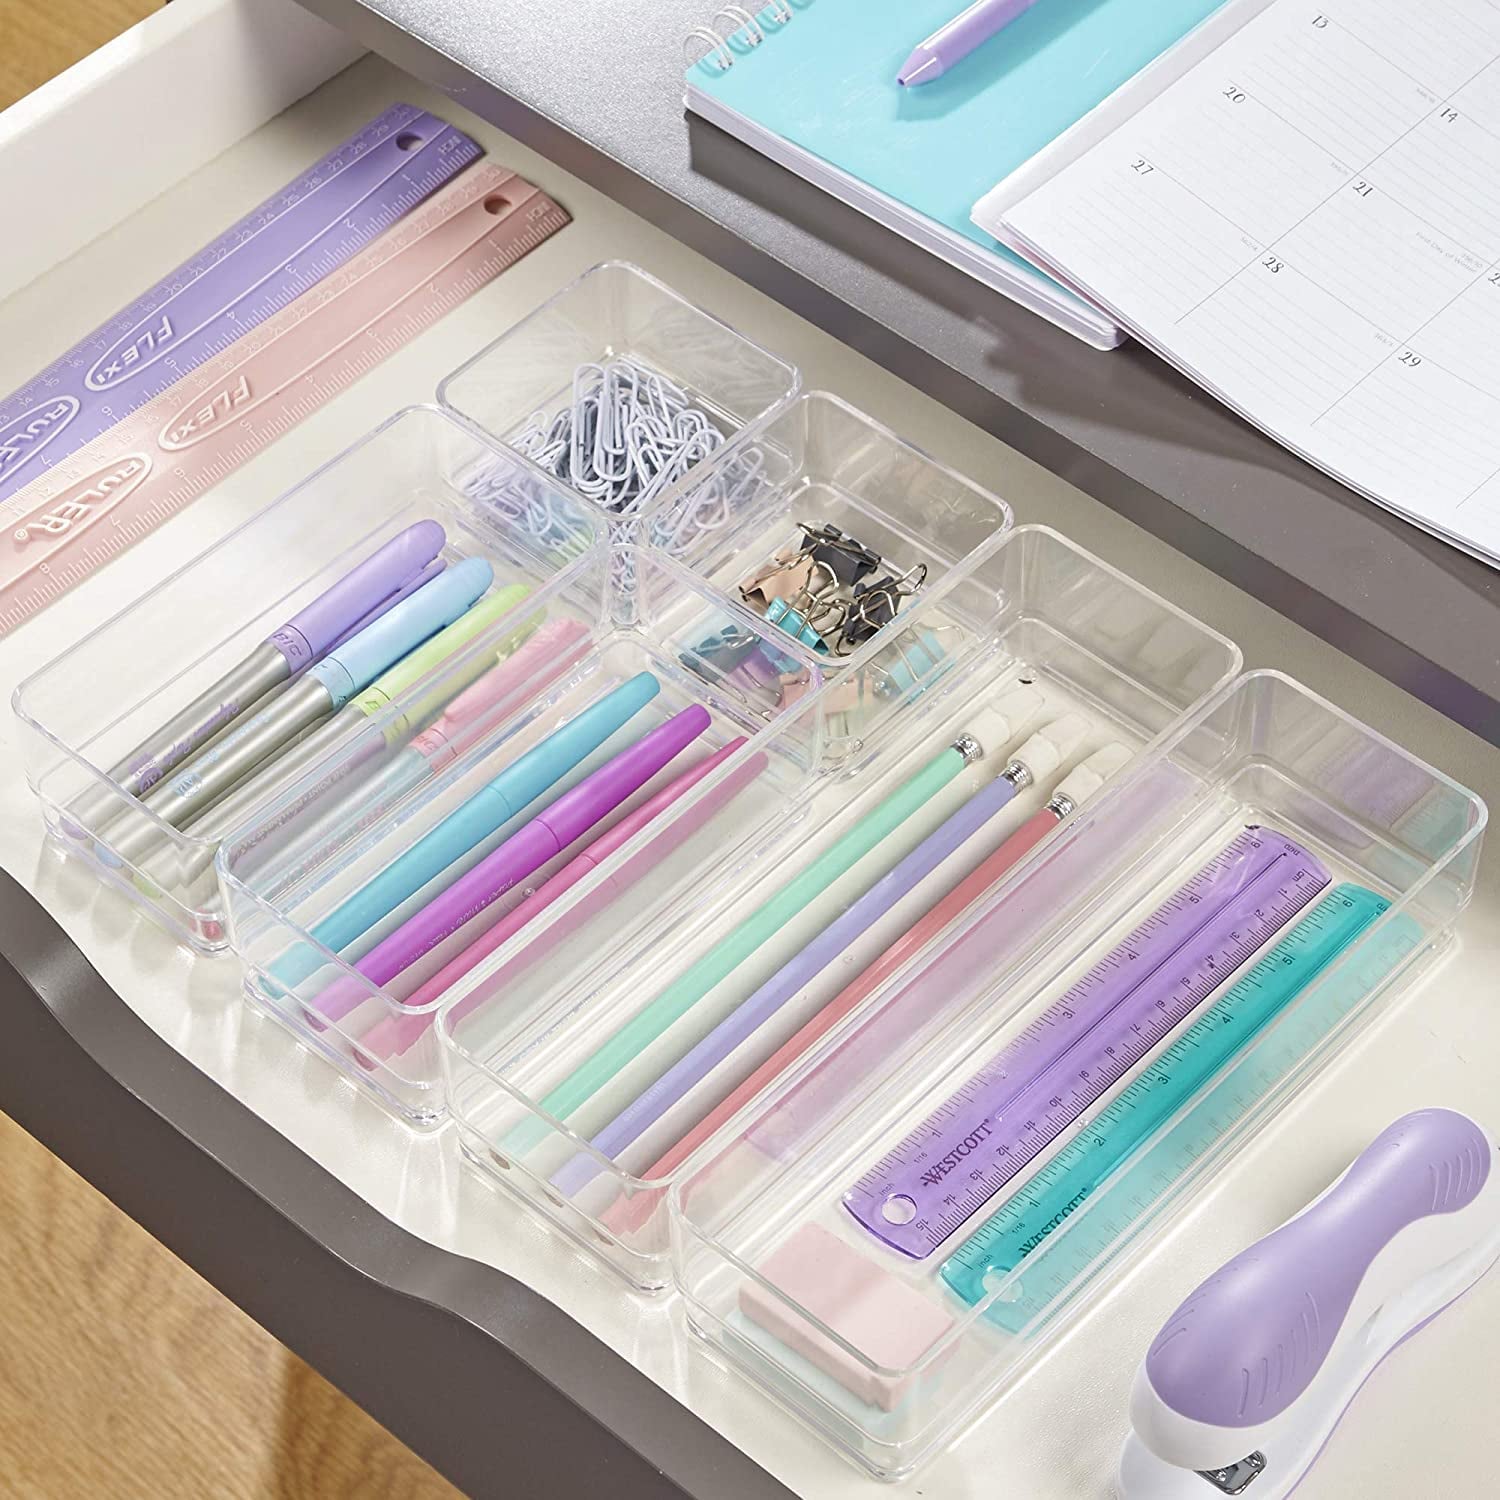 21 Essential Office Supplies You Should Have